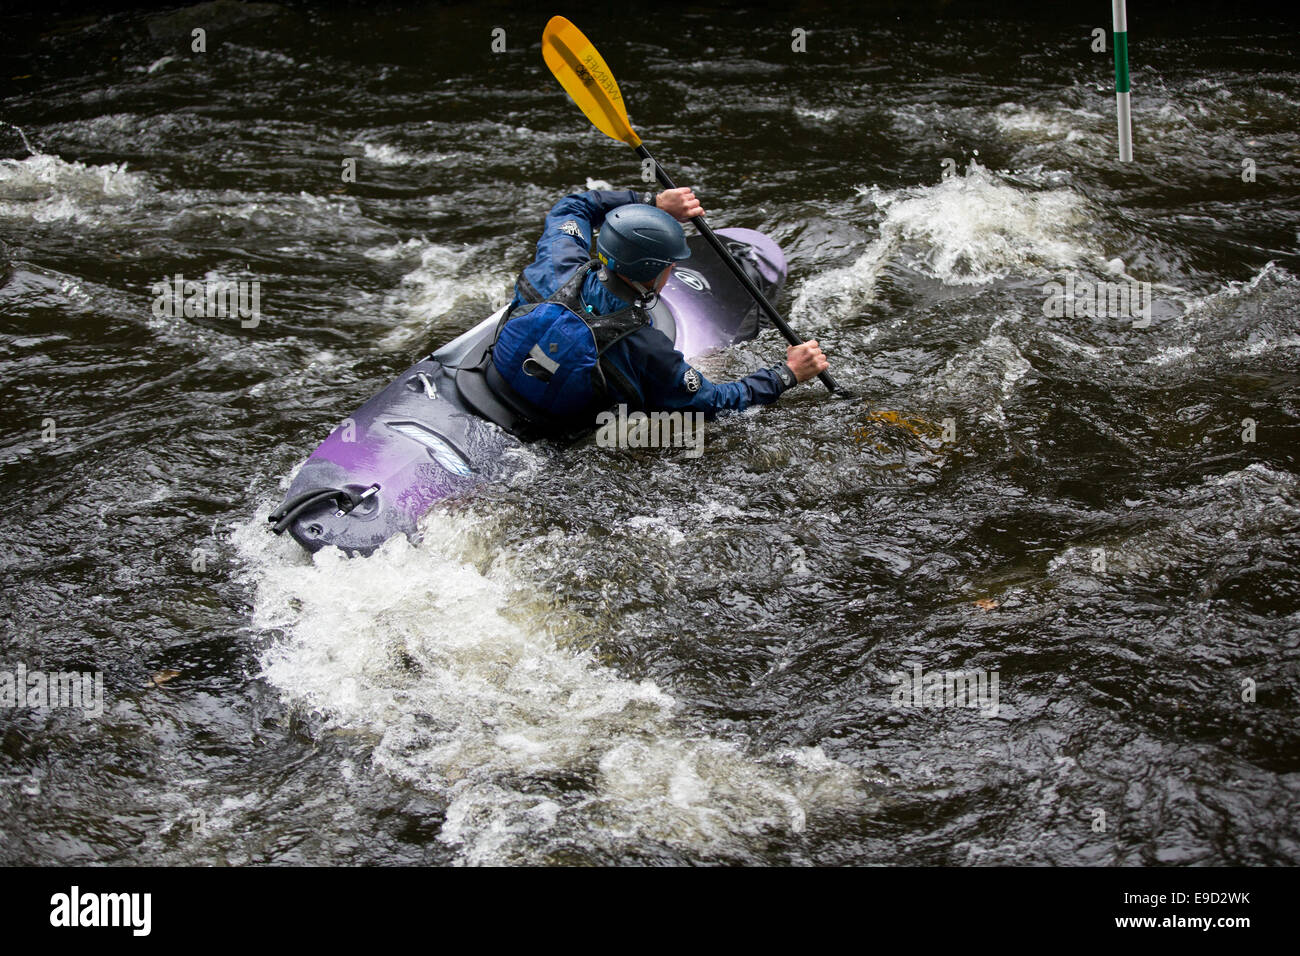 Llandysul, Wales, UK. 25th Oct, 2014. Hundreds of paddlers gather at Llandysul to enjoy the annual two day Teifi Tour, The Tour comprises six stages along the Teifi River, from Llanfihangel yr Arth, down to Poppit Sands, offering kayakers stretches of white water which suit many levels of ability. Credit:  atgof.co/Alamy Live News Stock Photo